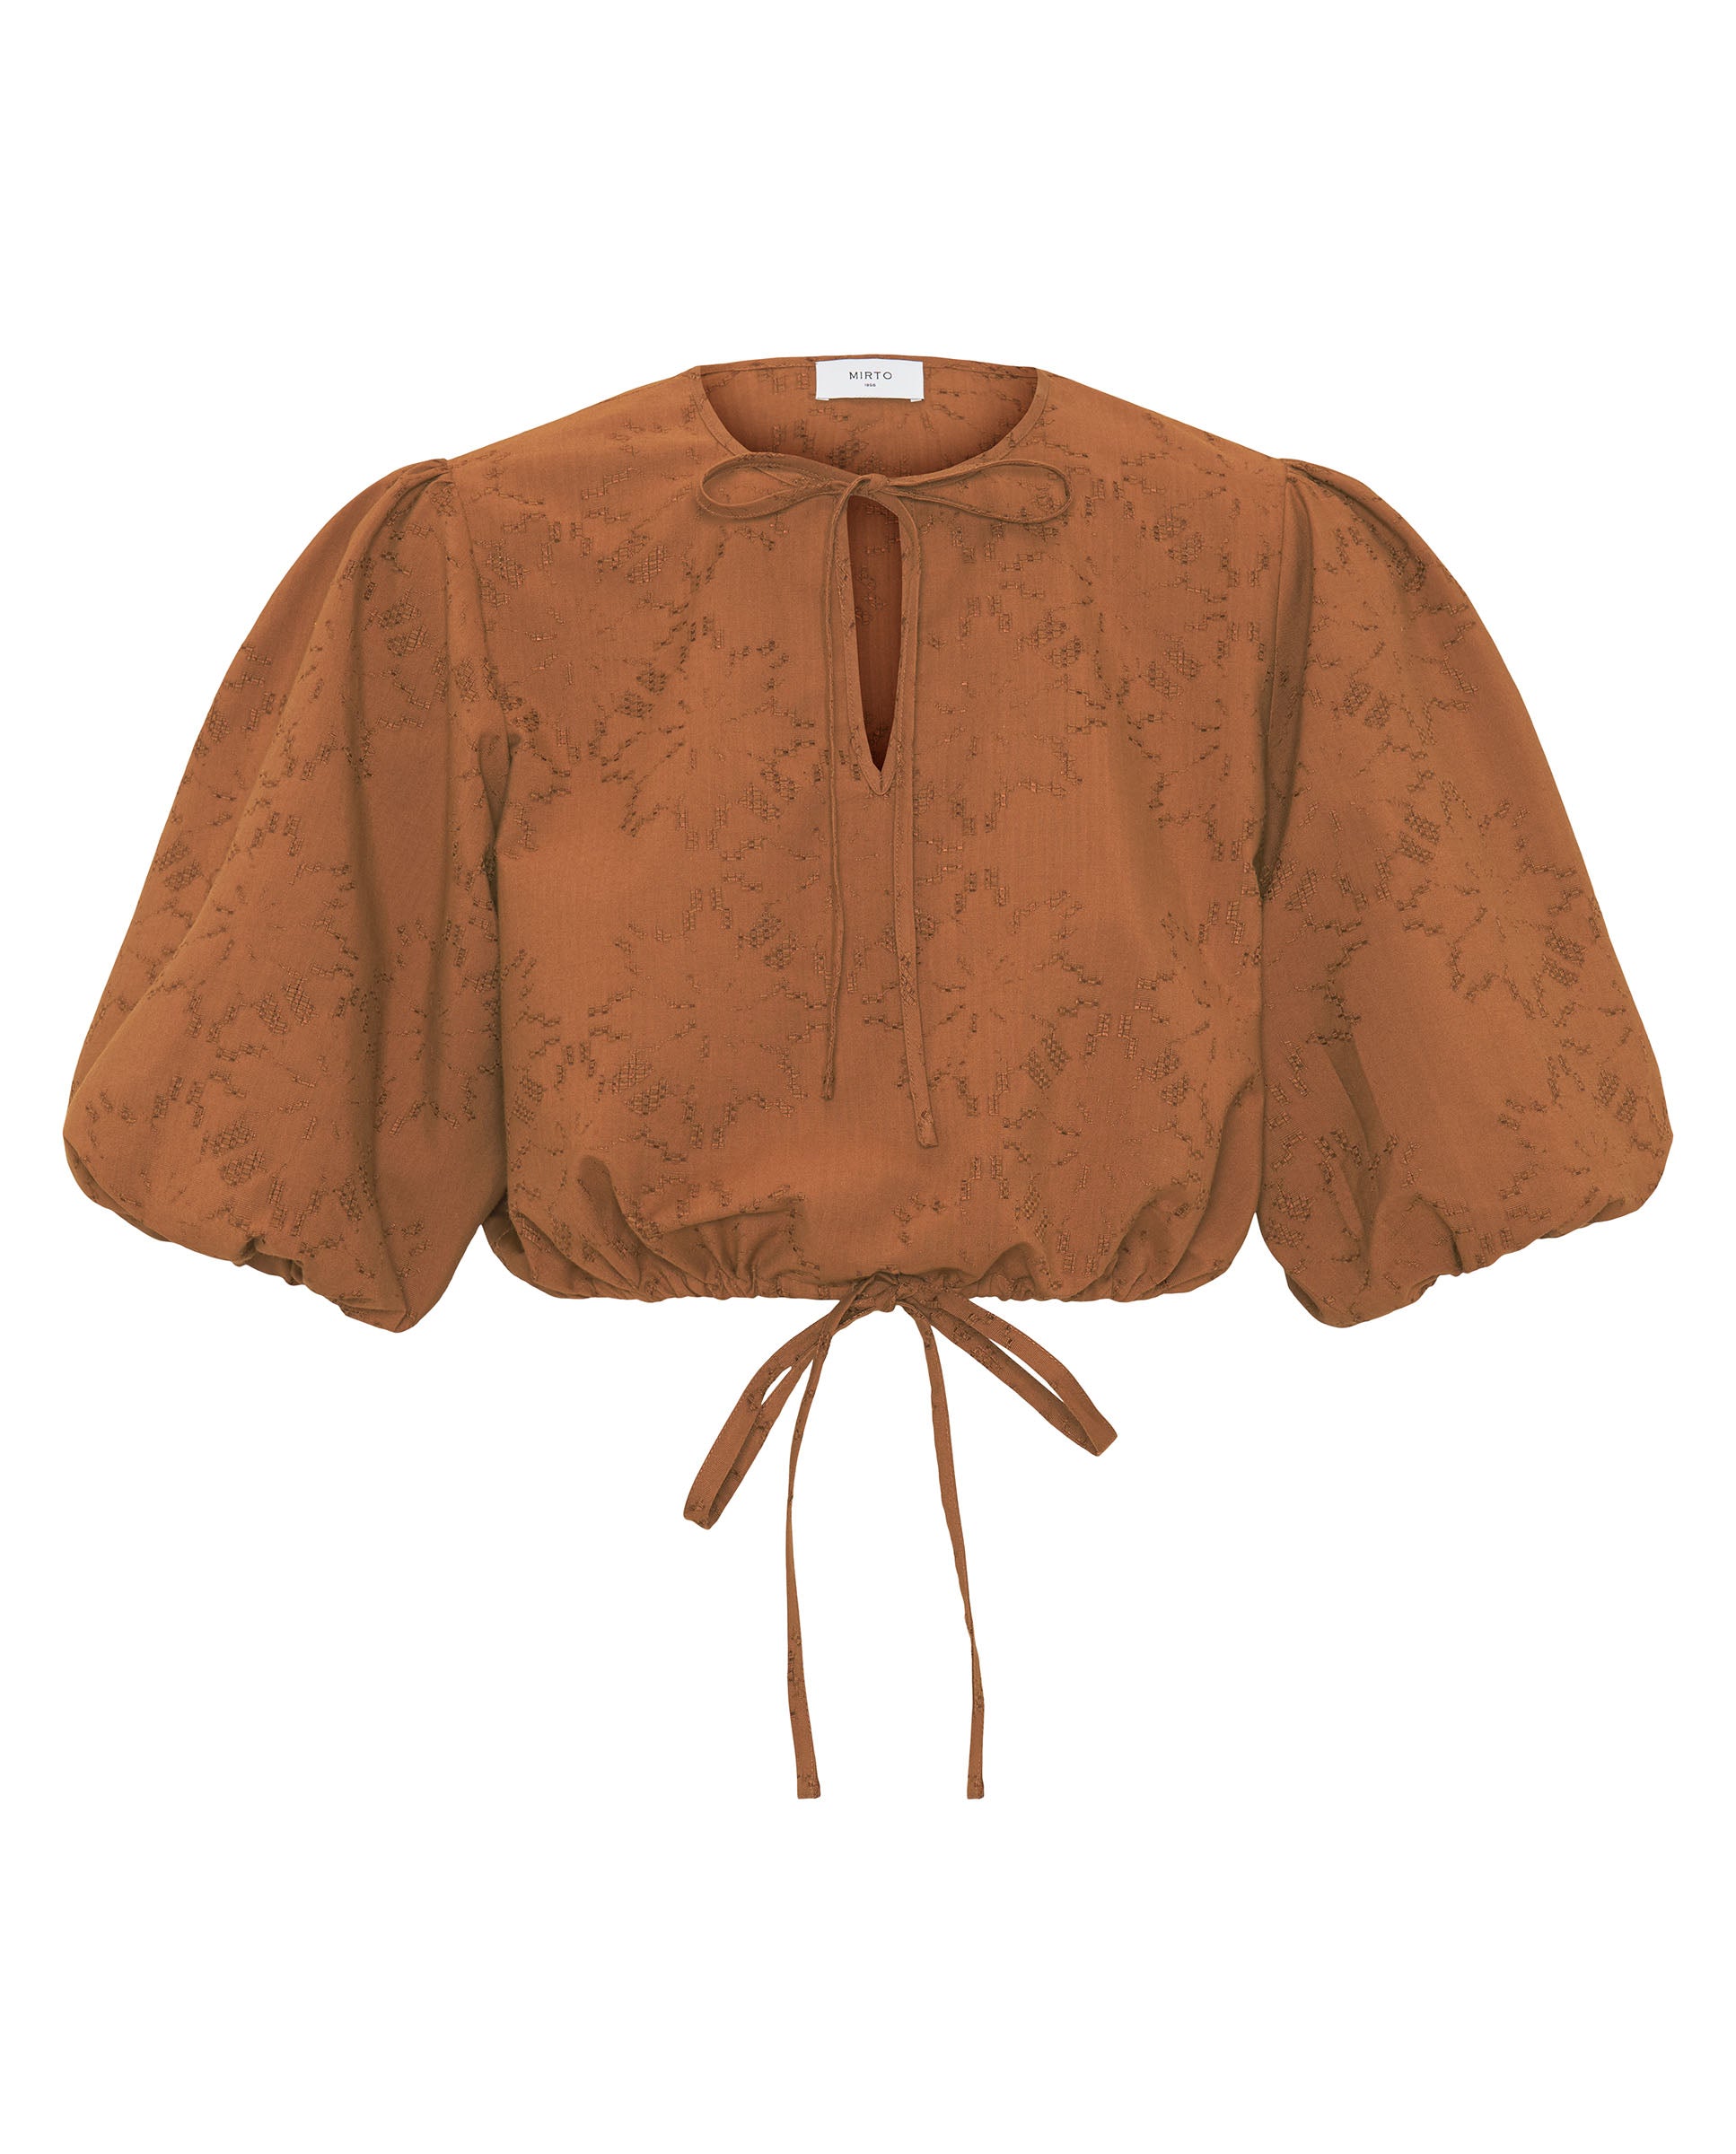 Ginger brown cotton blend jacquard top by MIRTO